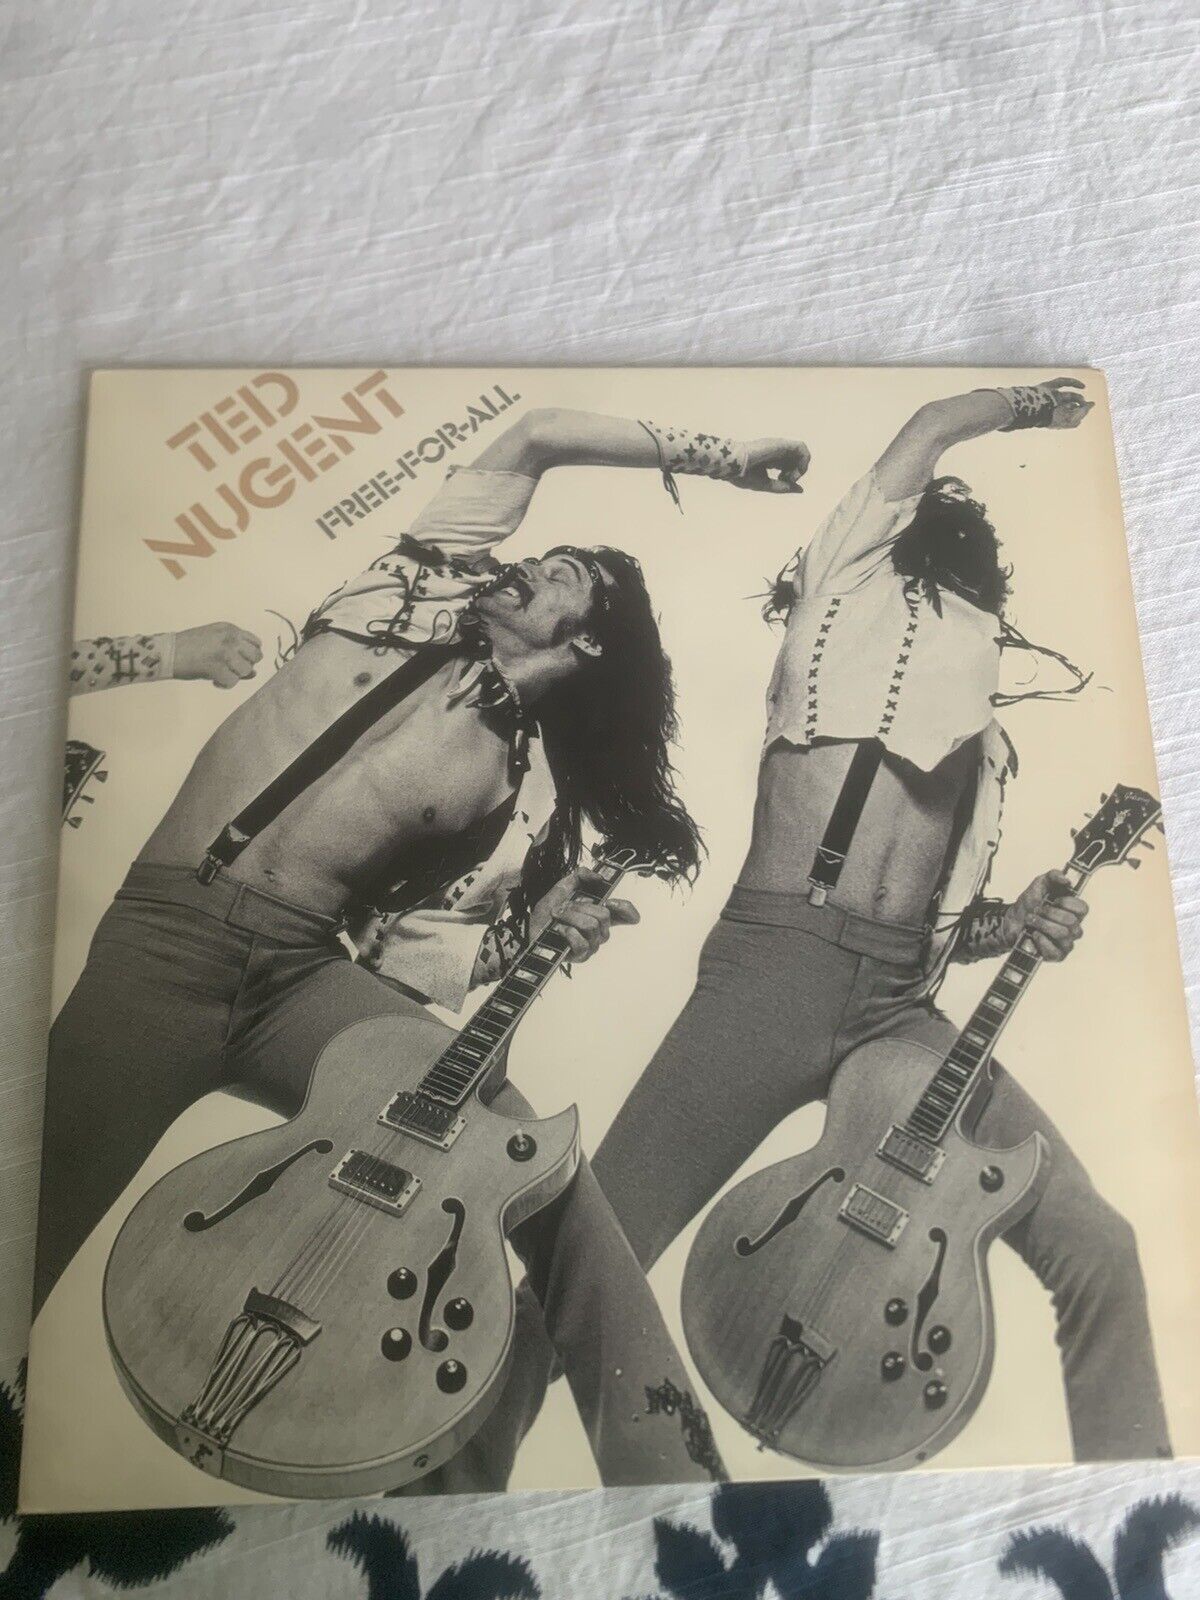 TED NUGENT - Free-For-All (Epic) - 12" Vinyl Record LP - VG+